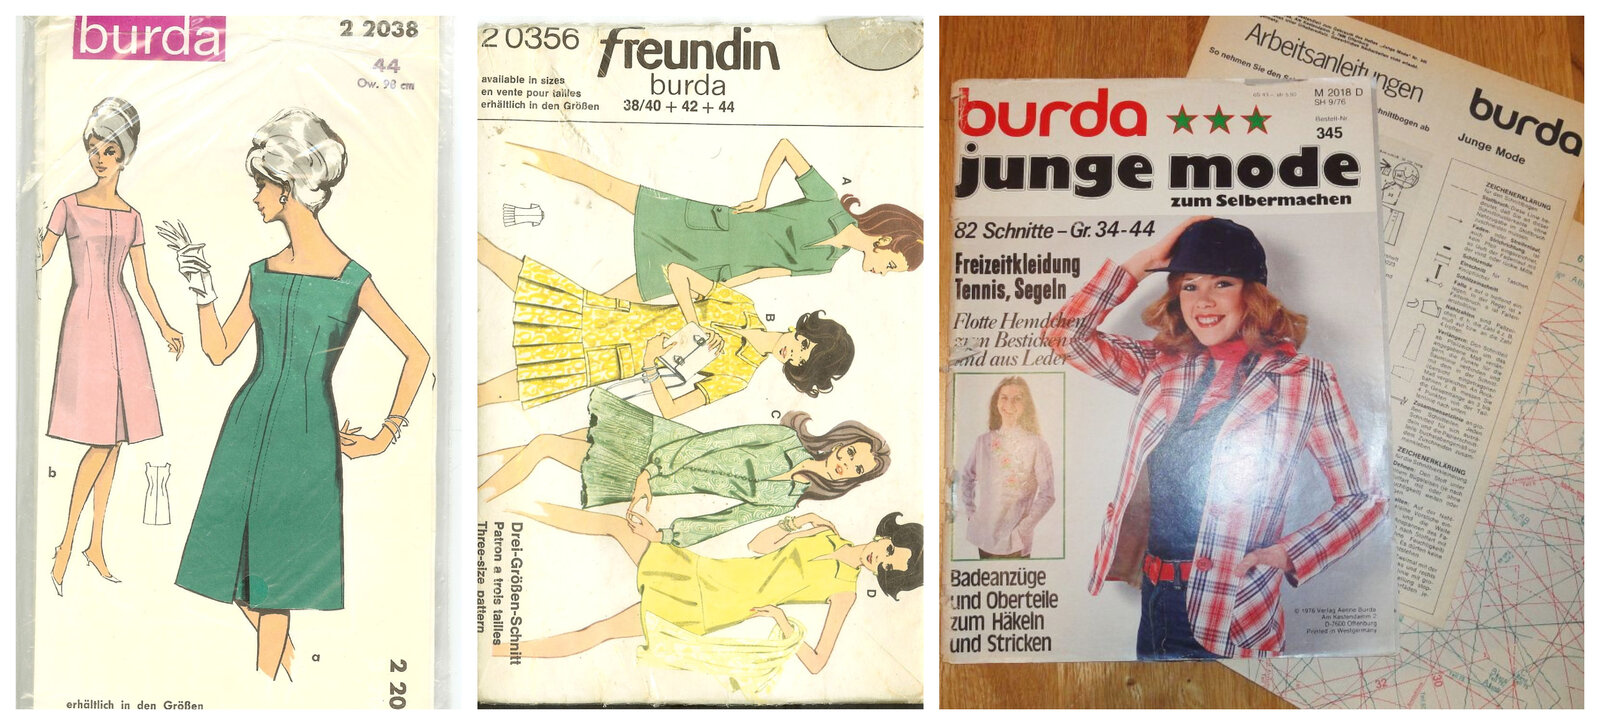 1960s pattern; Early 1970s multi-size pattern with Freundin magazine endorsement; 1970s Burda Moden special issue for teenagers